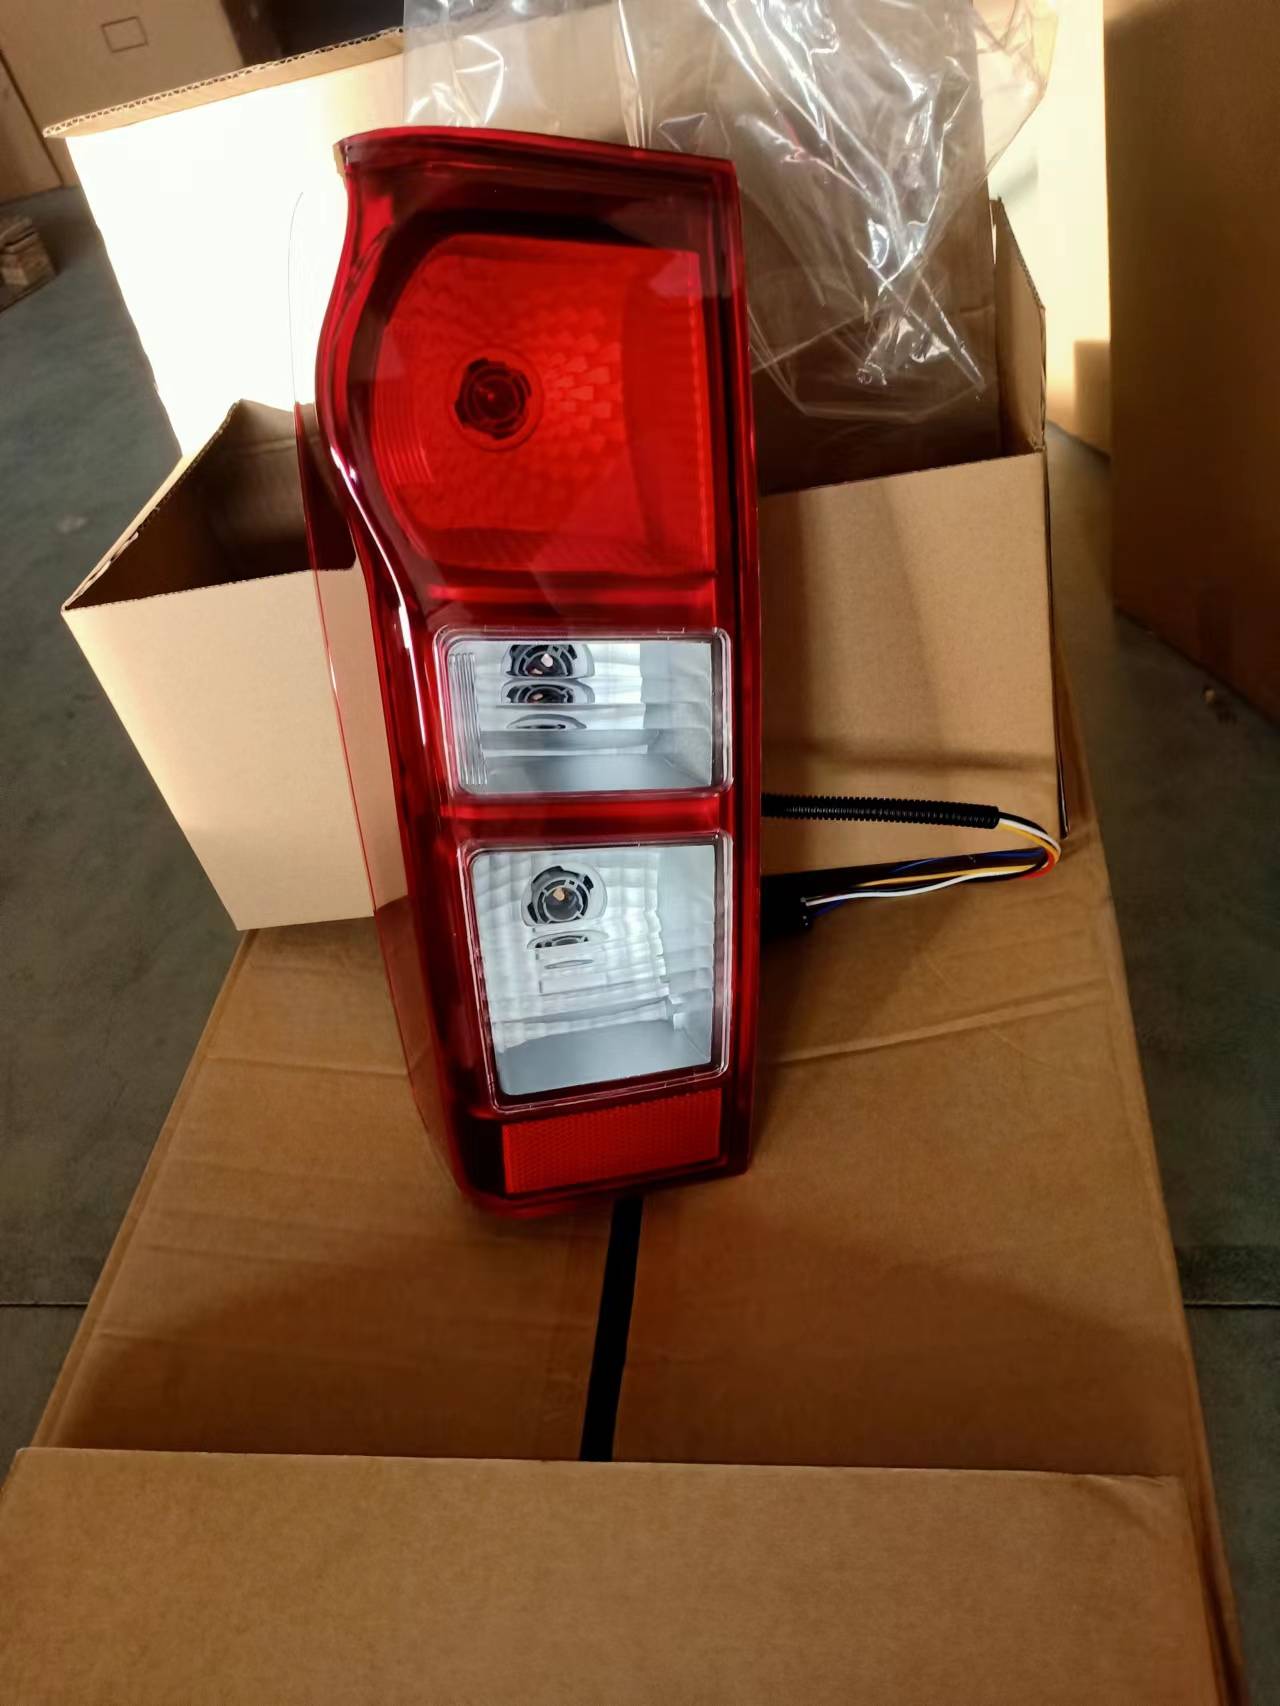  Tail Lamp Brake Rear Light with OE 8961254023 8981254033 for Isuzu D-Max Dmax 2012-2016 2014